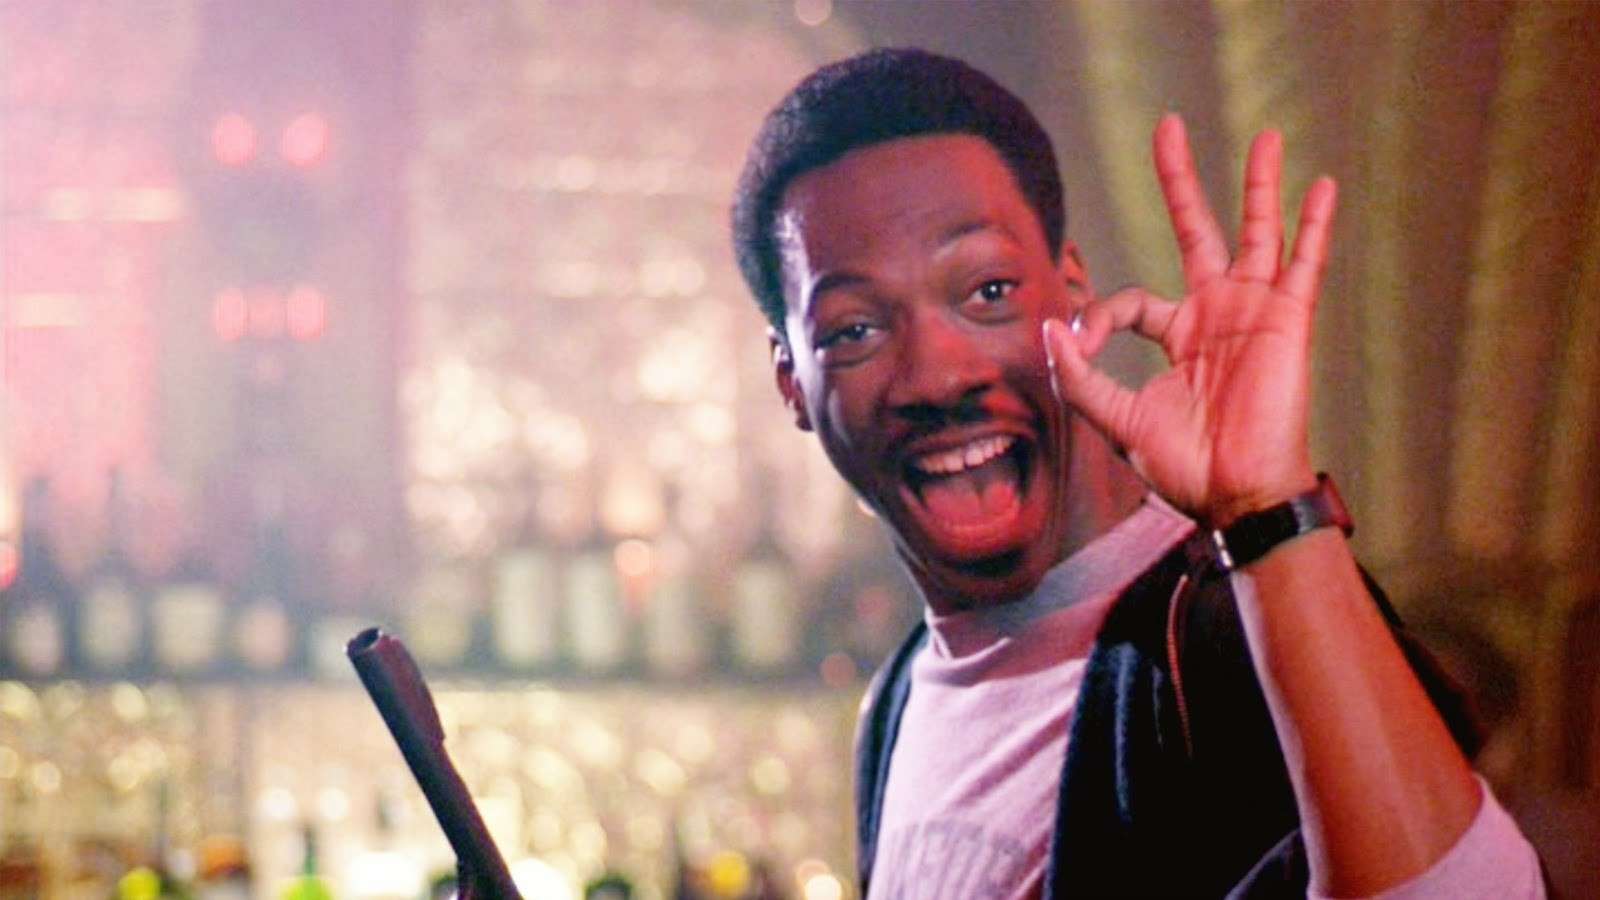 Eddie Murphy as Axel Foley in Beverly Hills Cop, giving the thumbs up